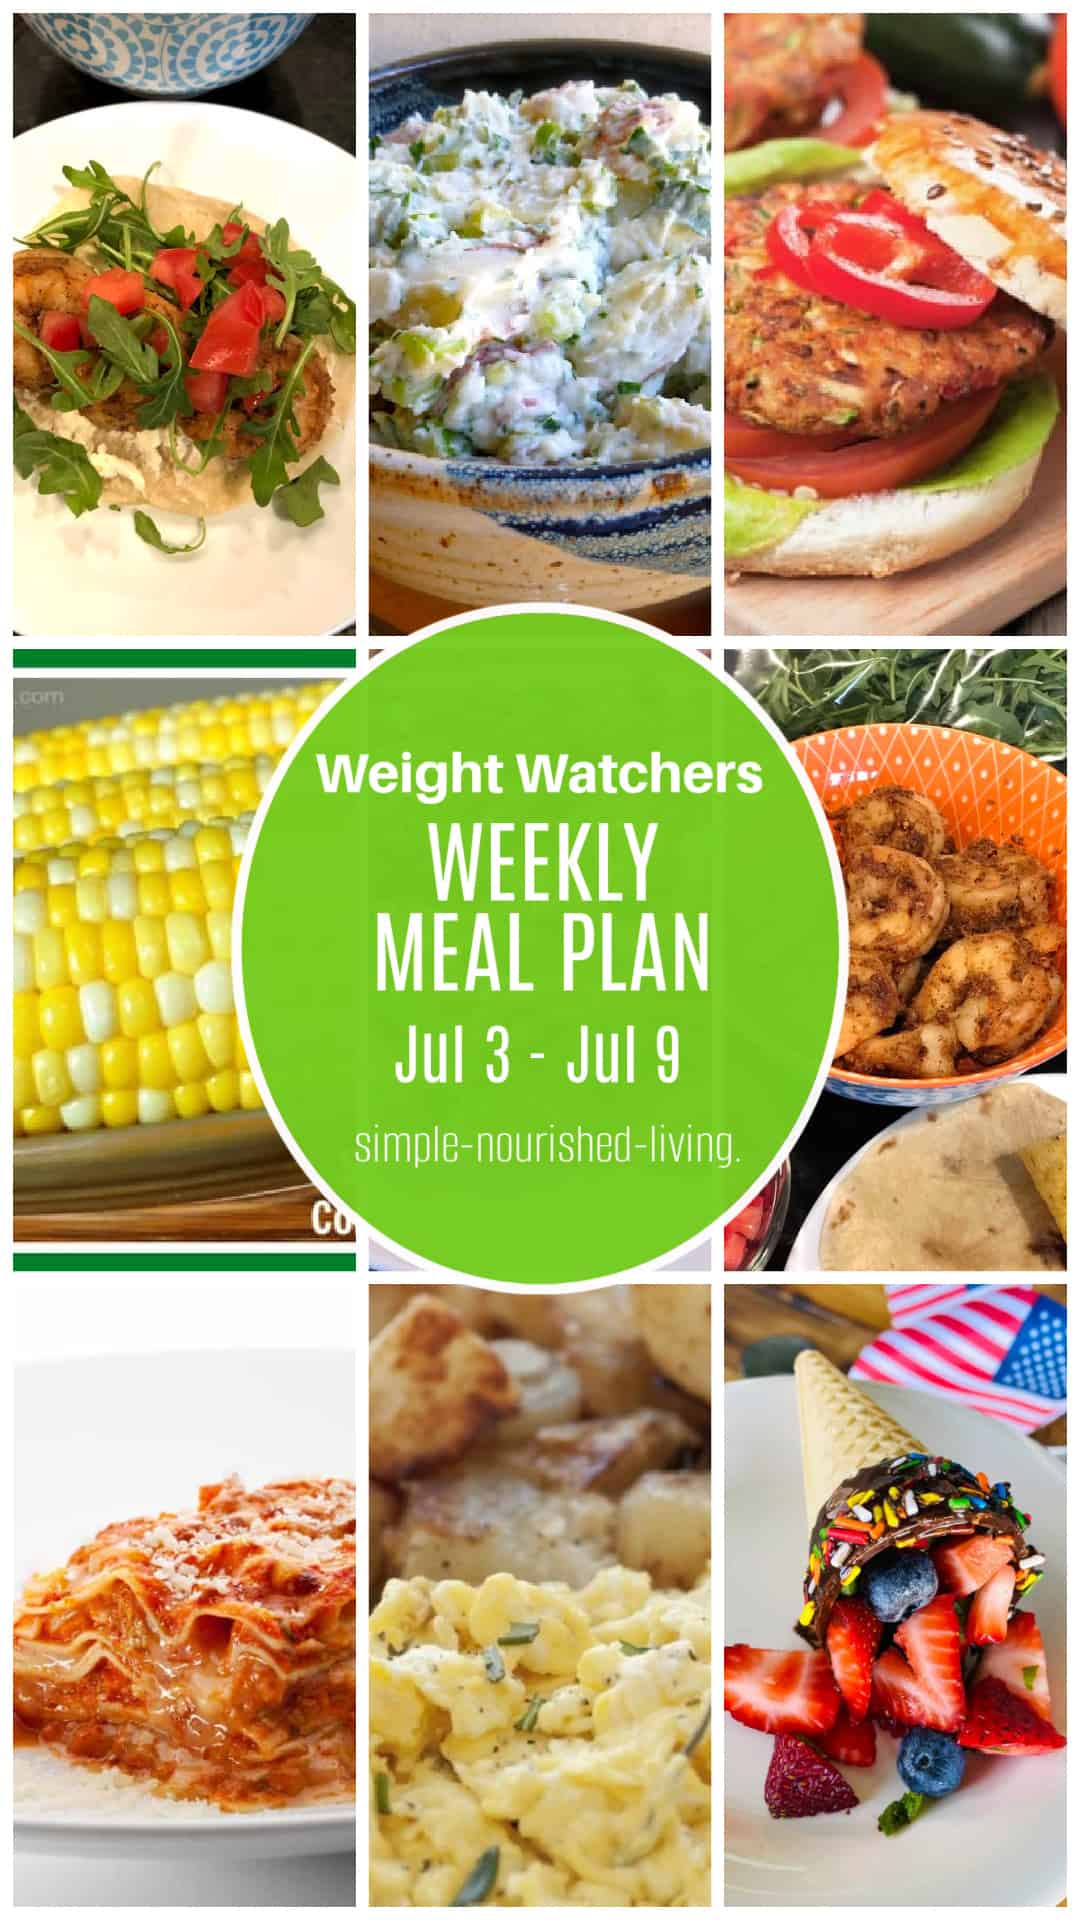 9-frame food photo collage featuring: shrimp tacos, potato salad, veggie burgers, corn on the cob, sautéed shrimp bowl, chicken parmesan lasagna, scrambled eggs and chocolate dip, fruit-filled ice cream cones with green round overlay: Weight Watchers Weekly Meal Plan July 3 - July 9